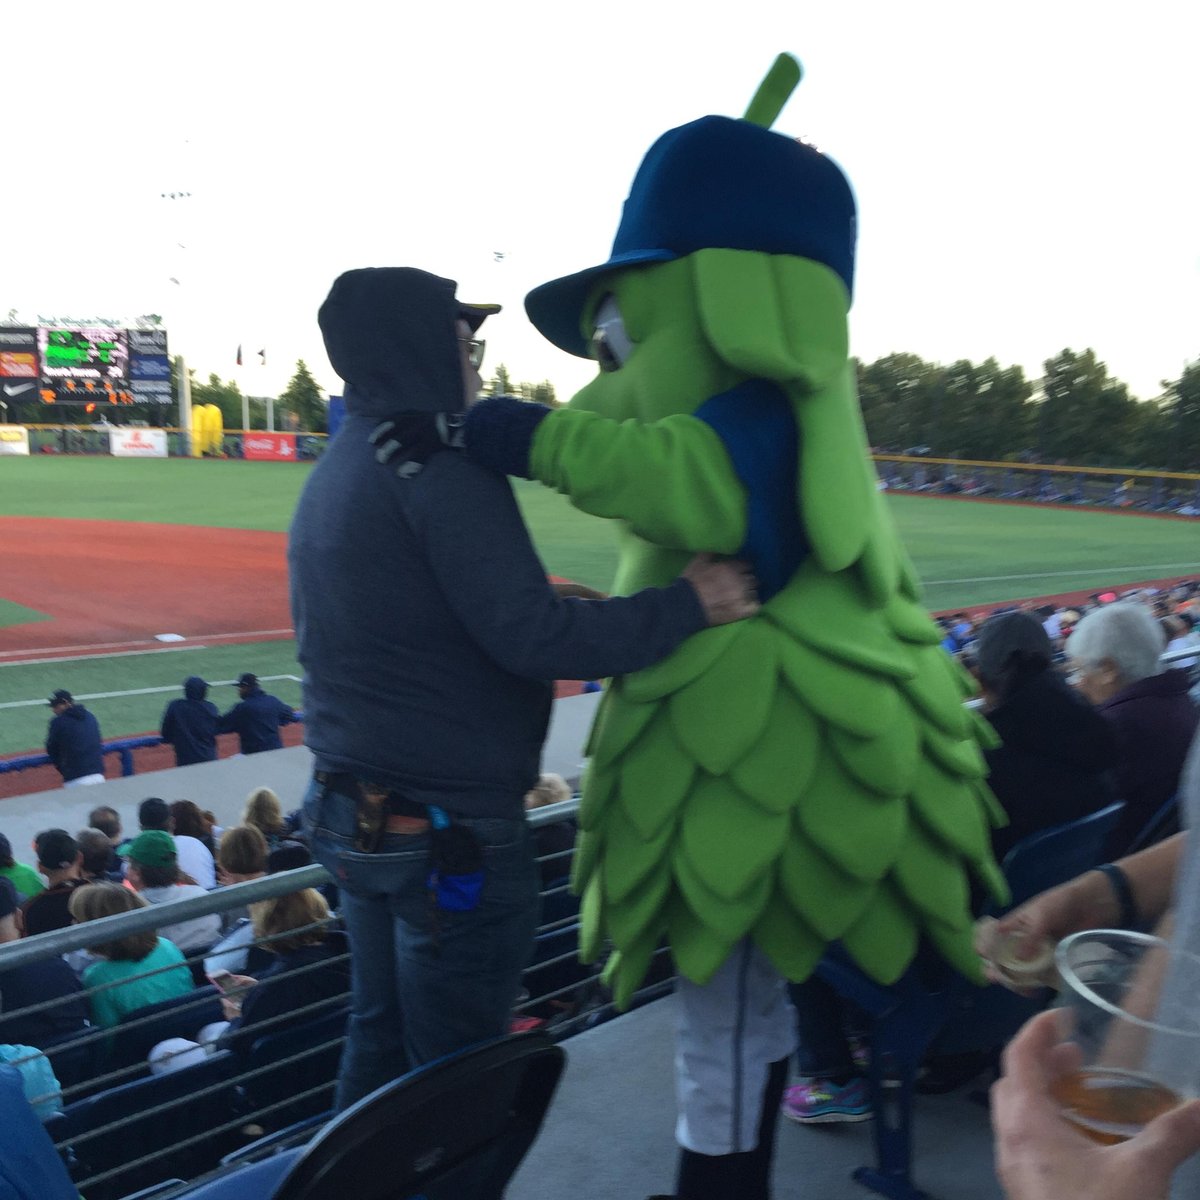 Hillsboro Hops officially announce affiliation deal, Sports